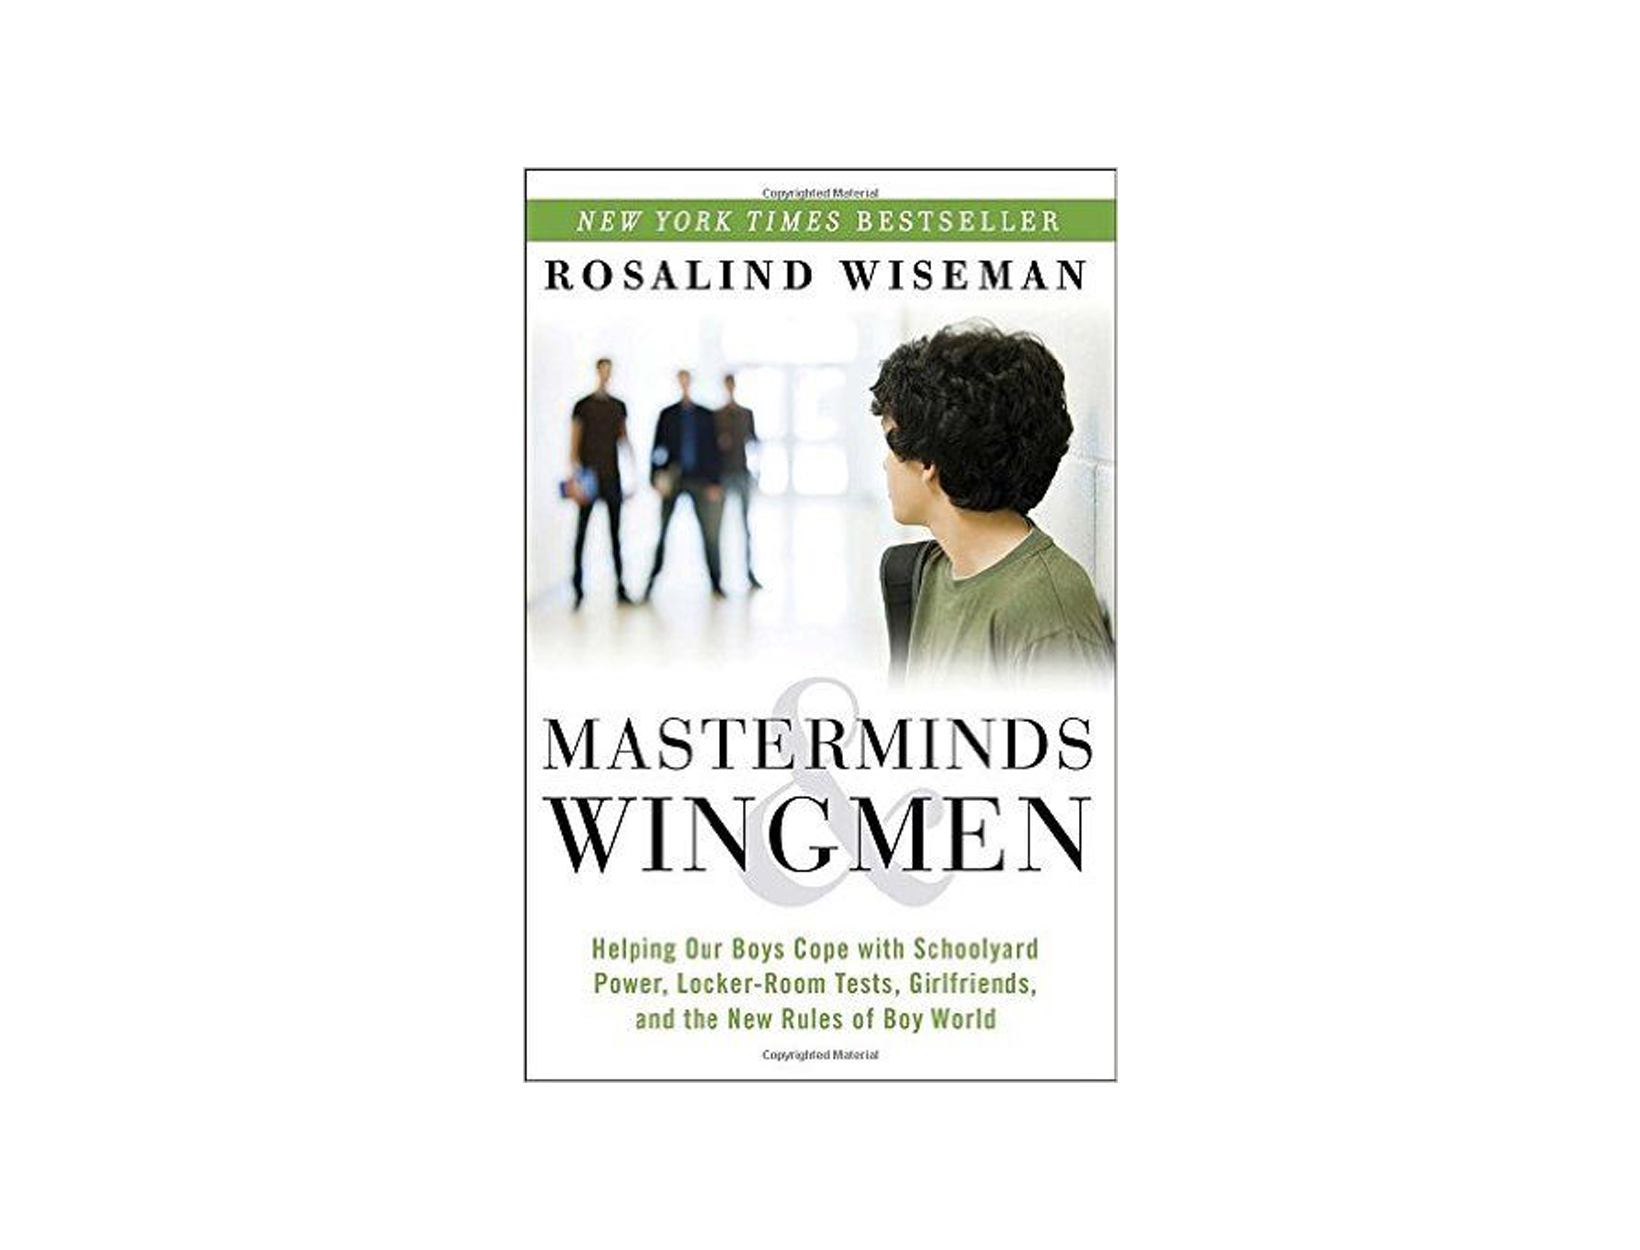 Masterminds and Wingmen by Rosalind Wiseman